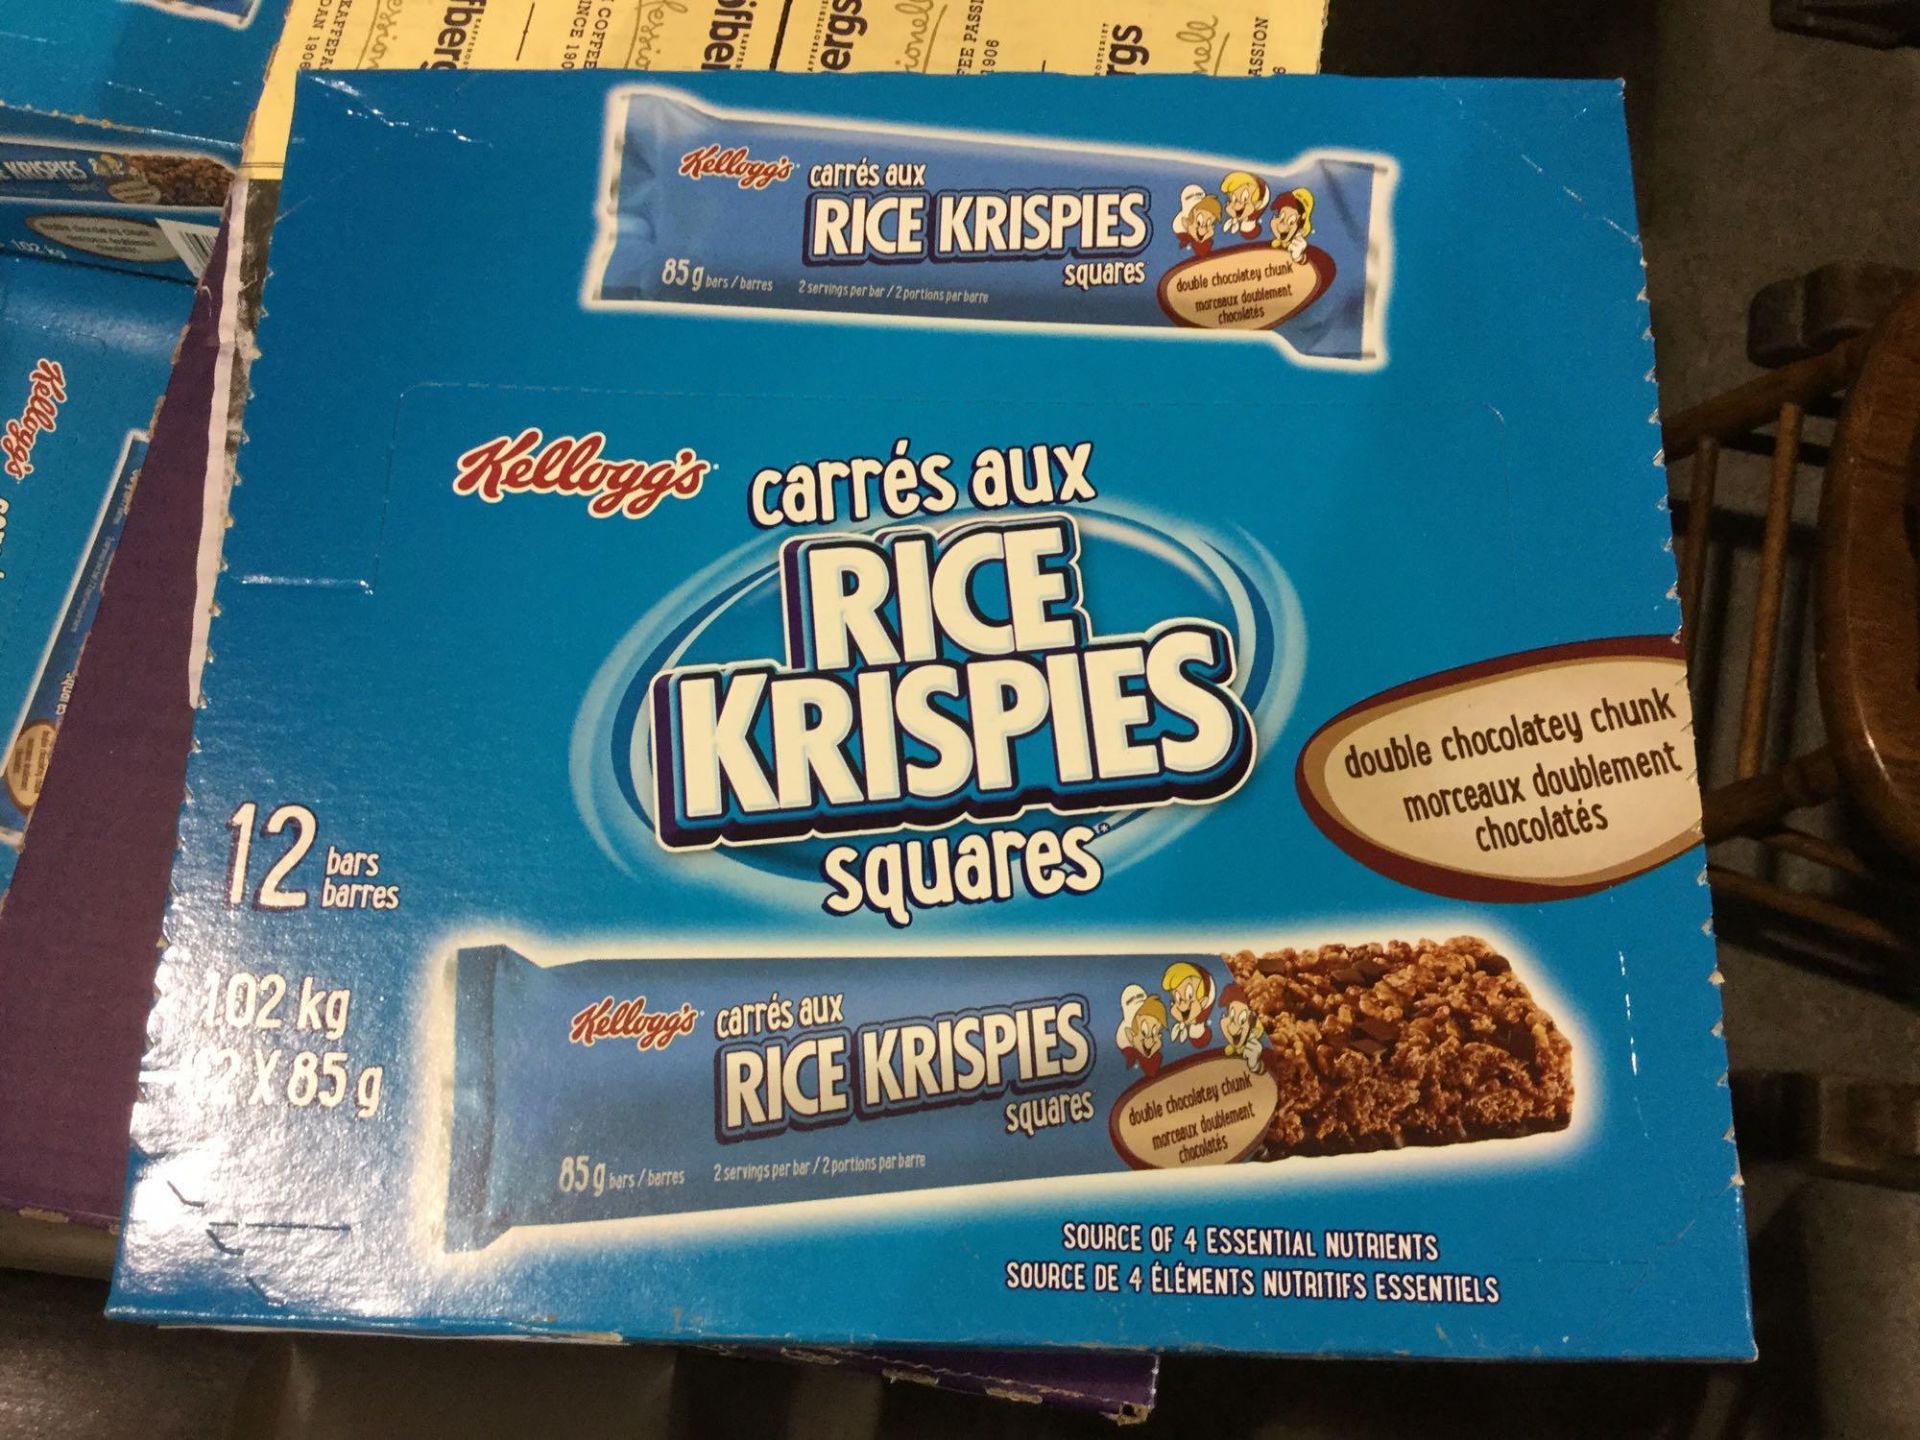 Case of 12 x 85 g Rice Kripies Square Bars - Double Chocolatey Chunk